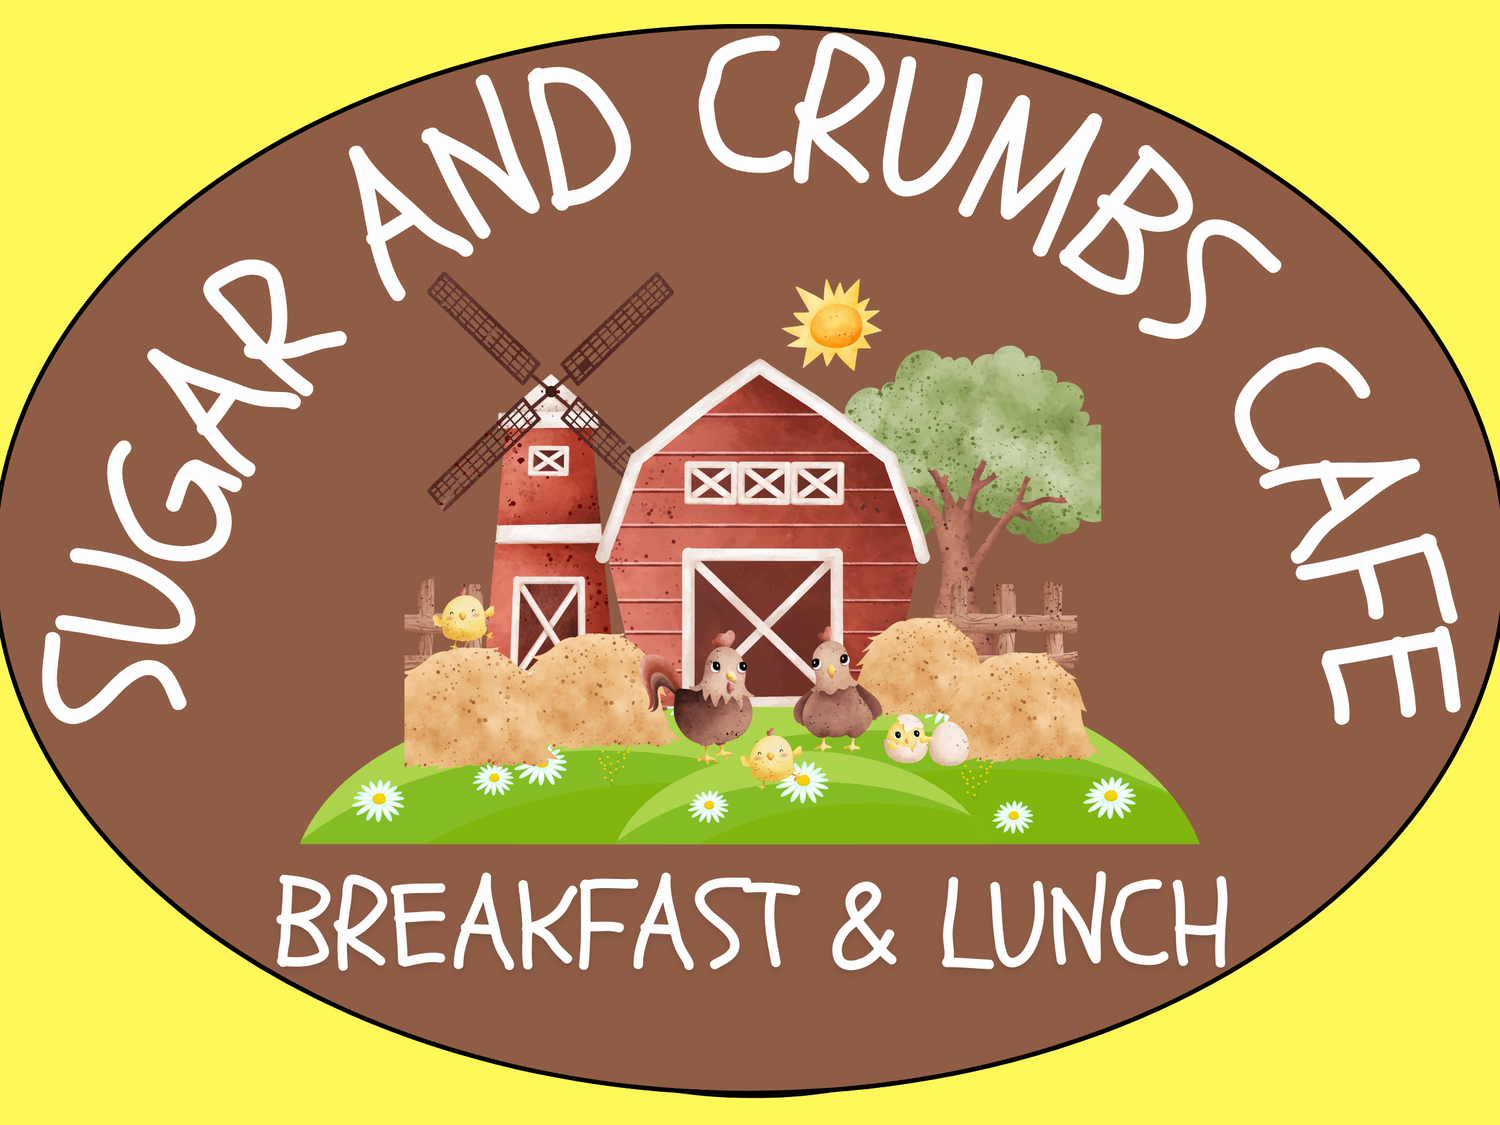 Sugar and Crumbs Cafe